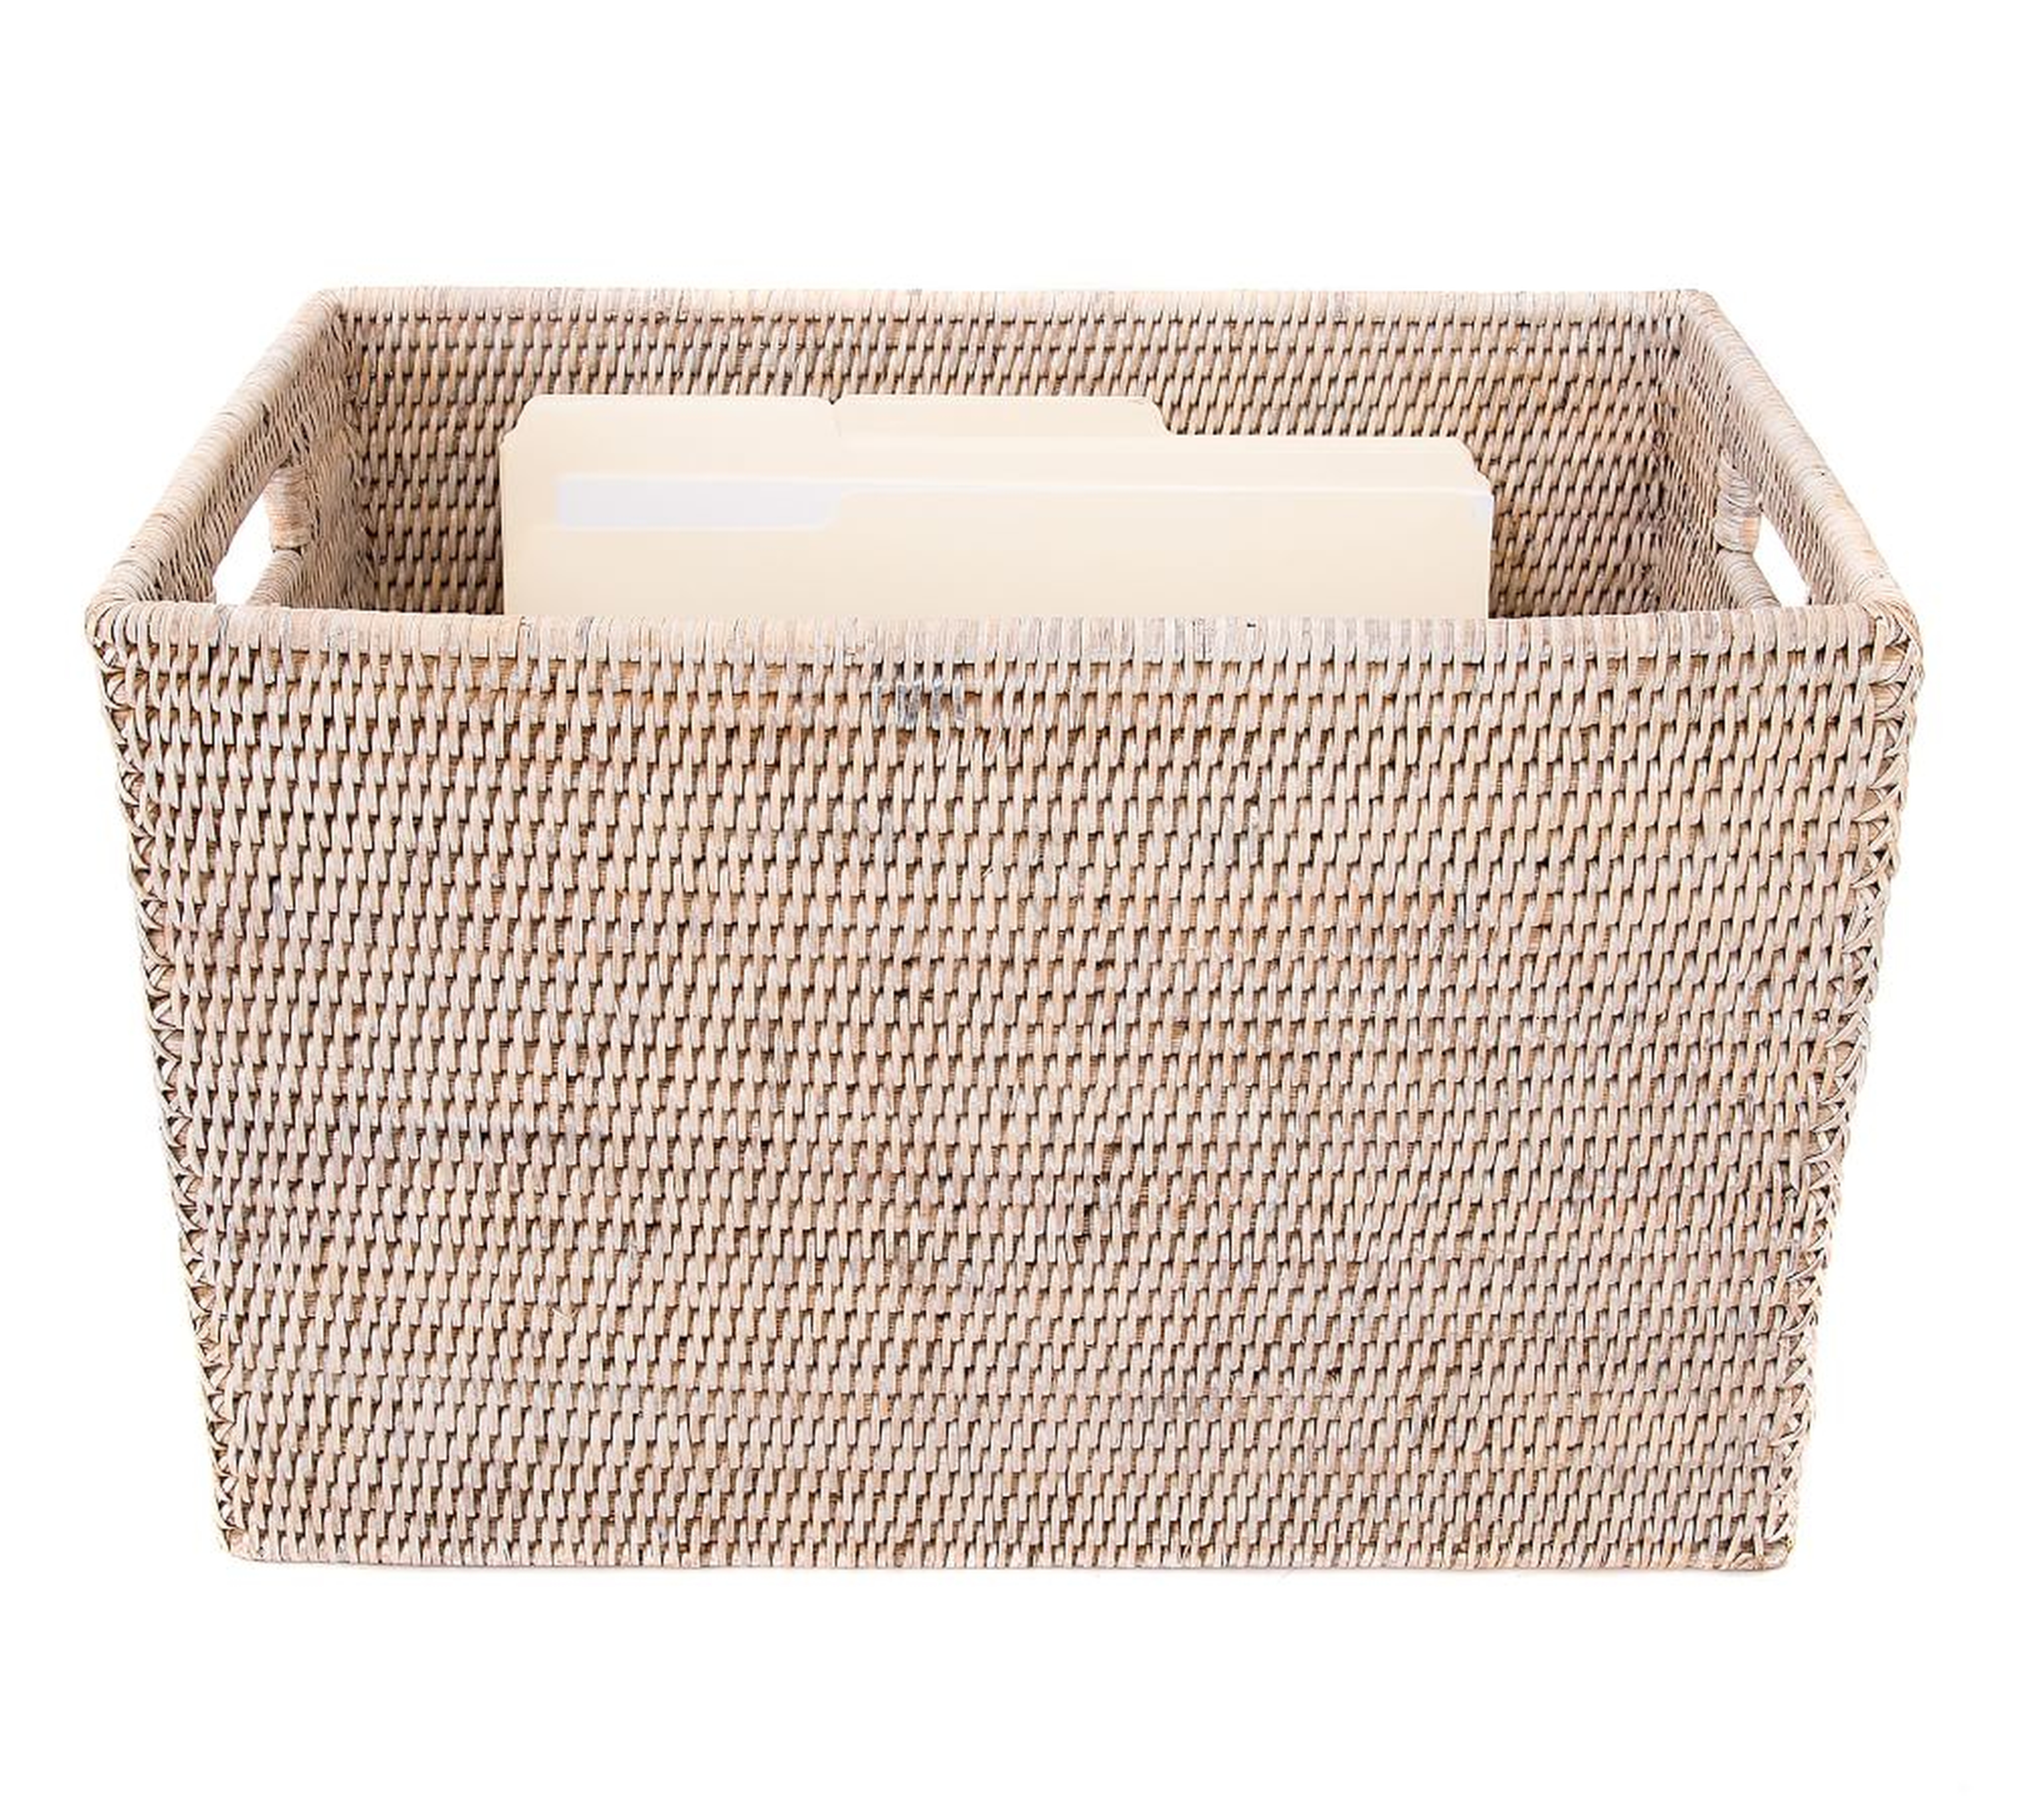 Tava Handwoven Rattan Legal File Box With Lid, White Wash - Pottery Barn